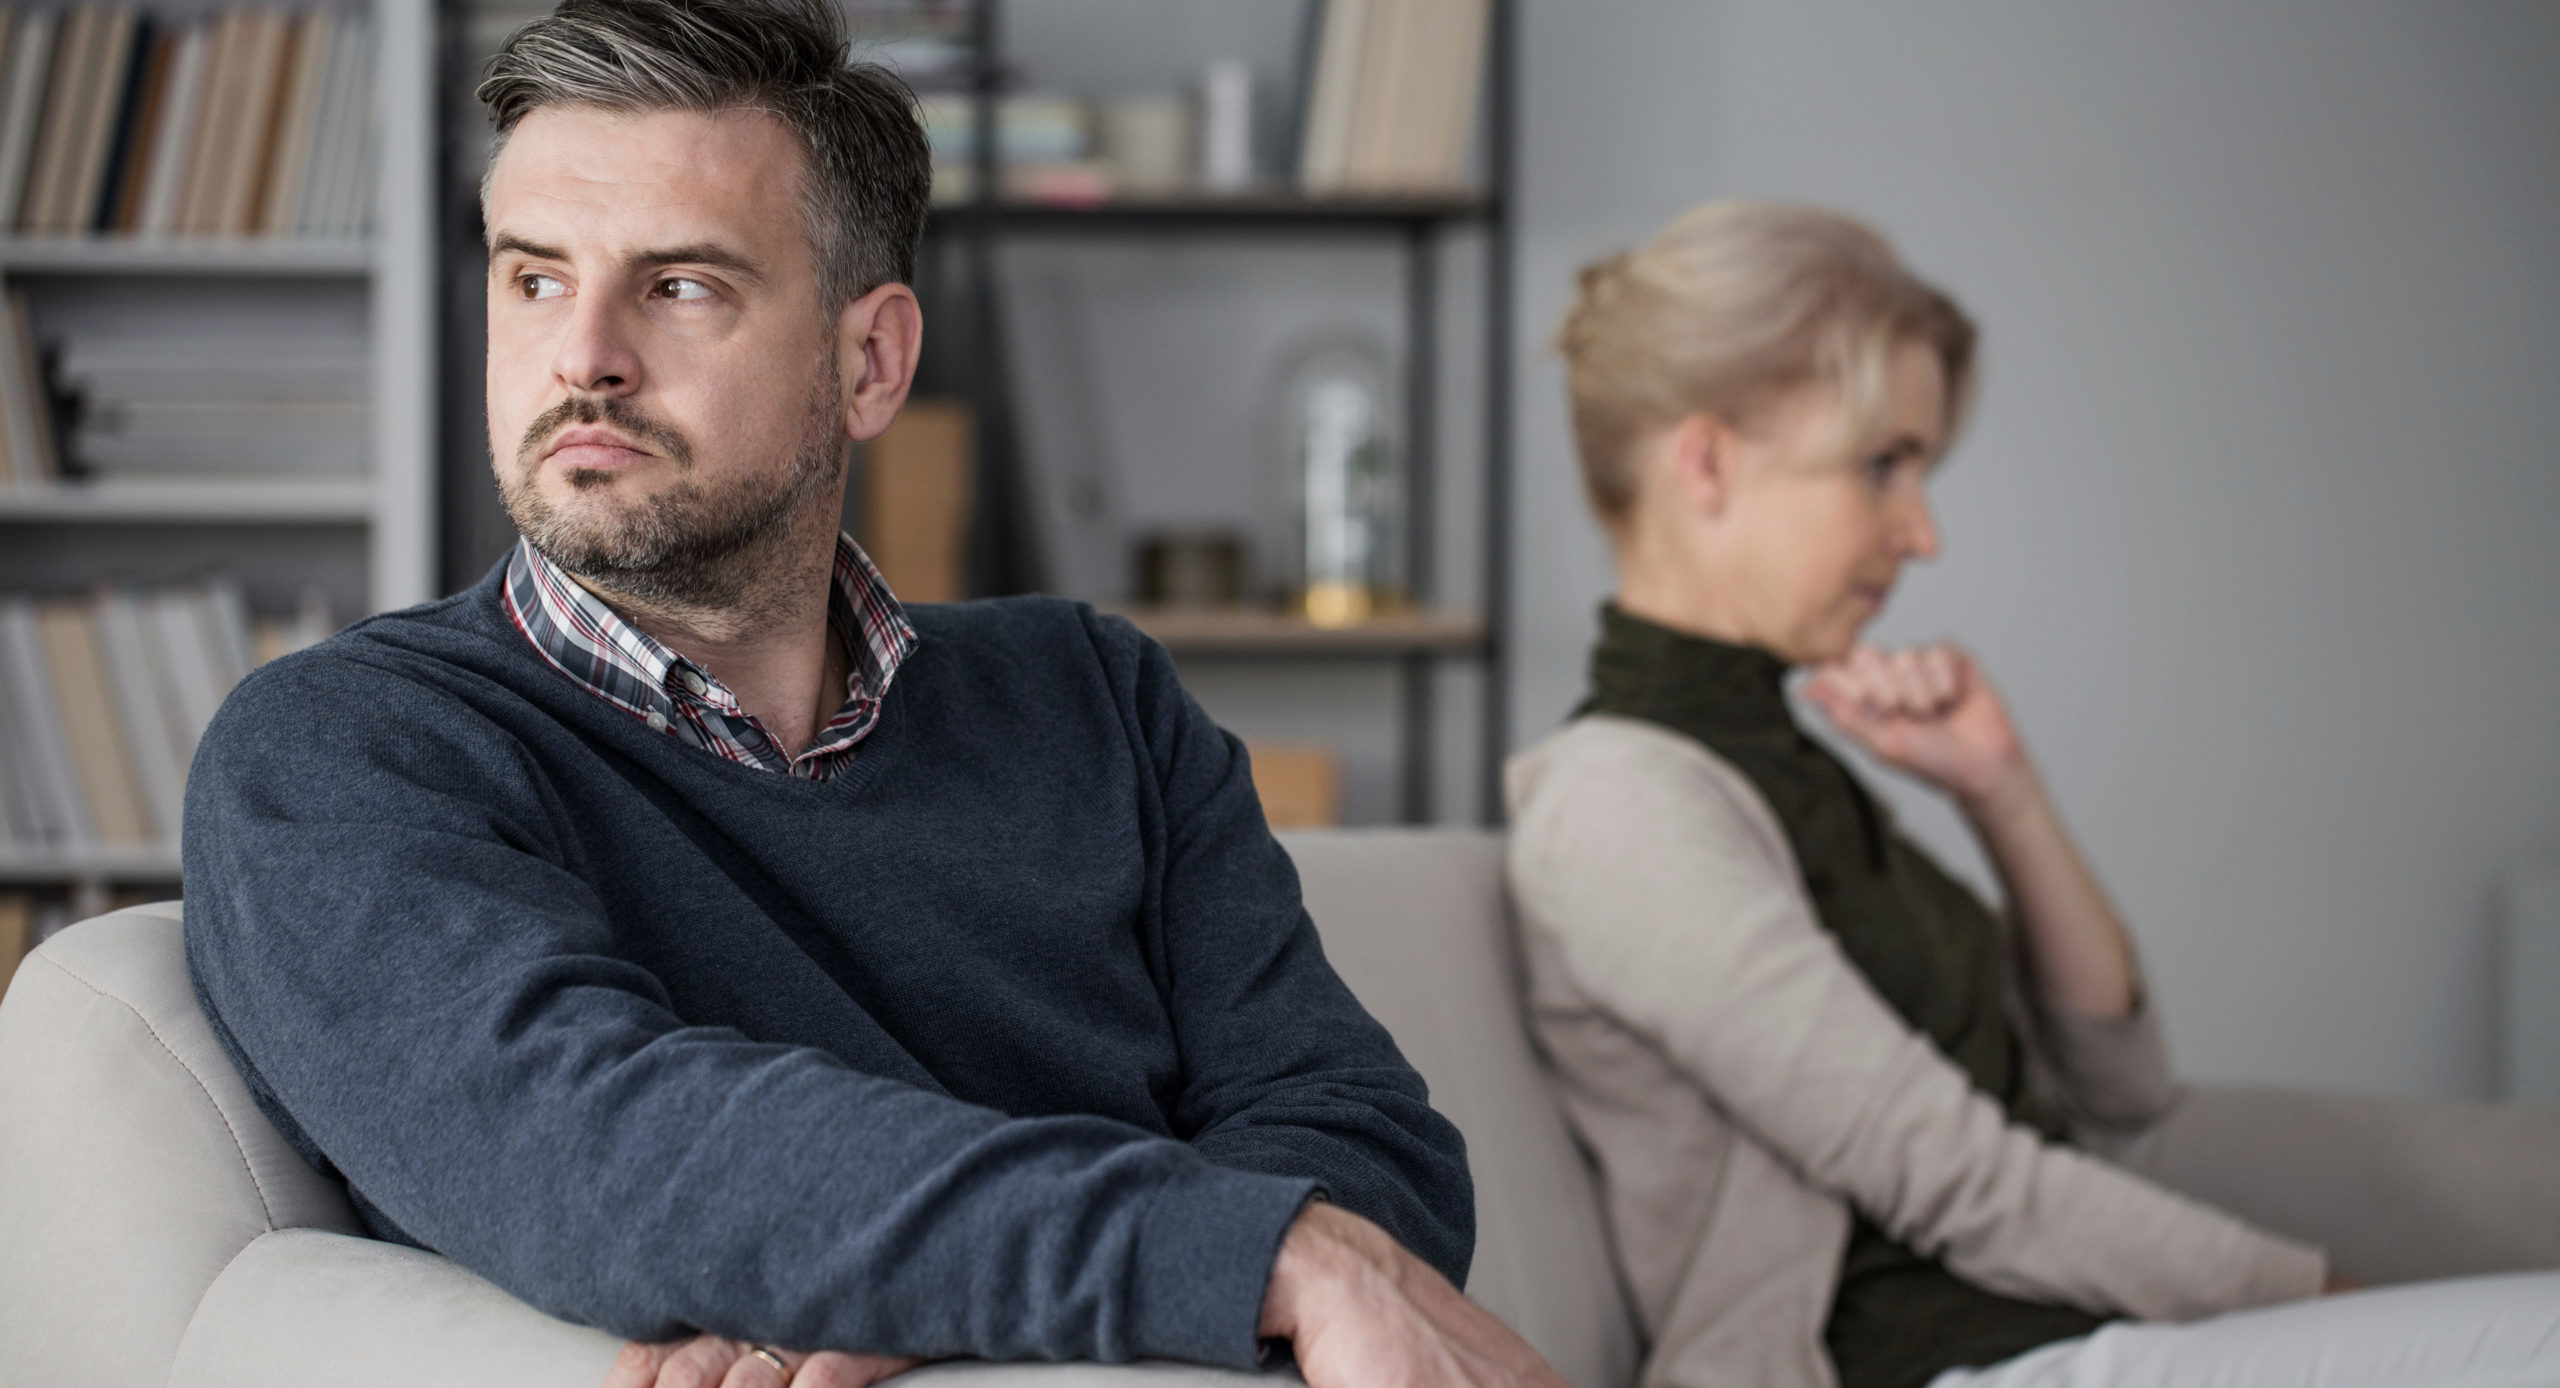 Couple sitting separately on couch, contemplating signs of divorce